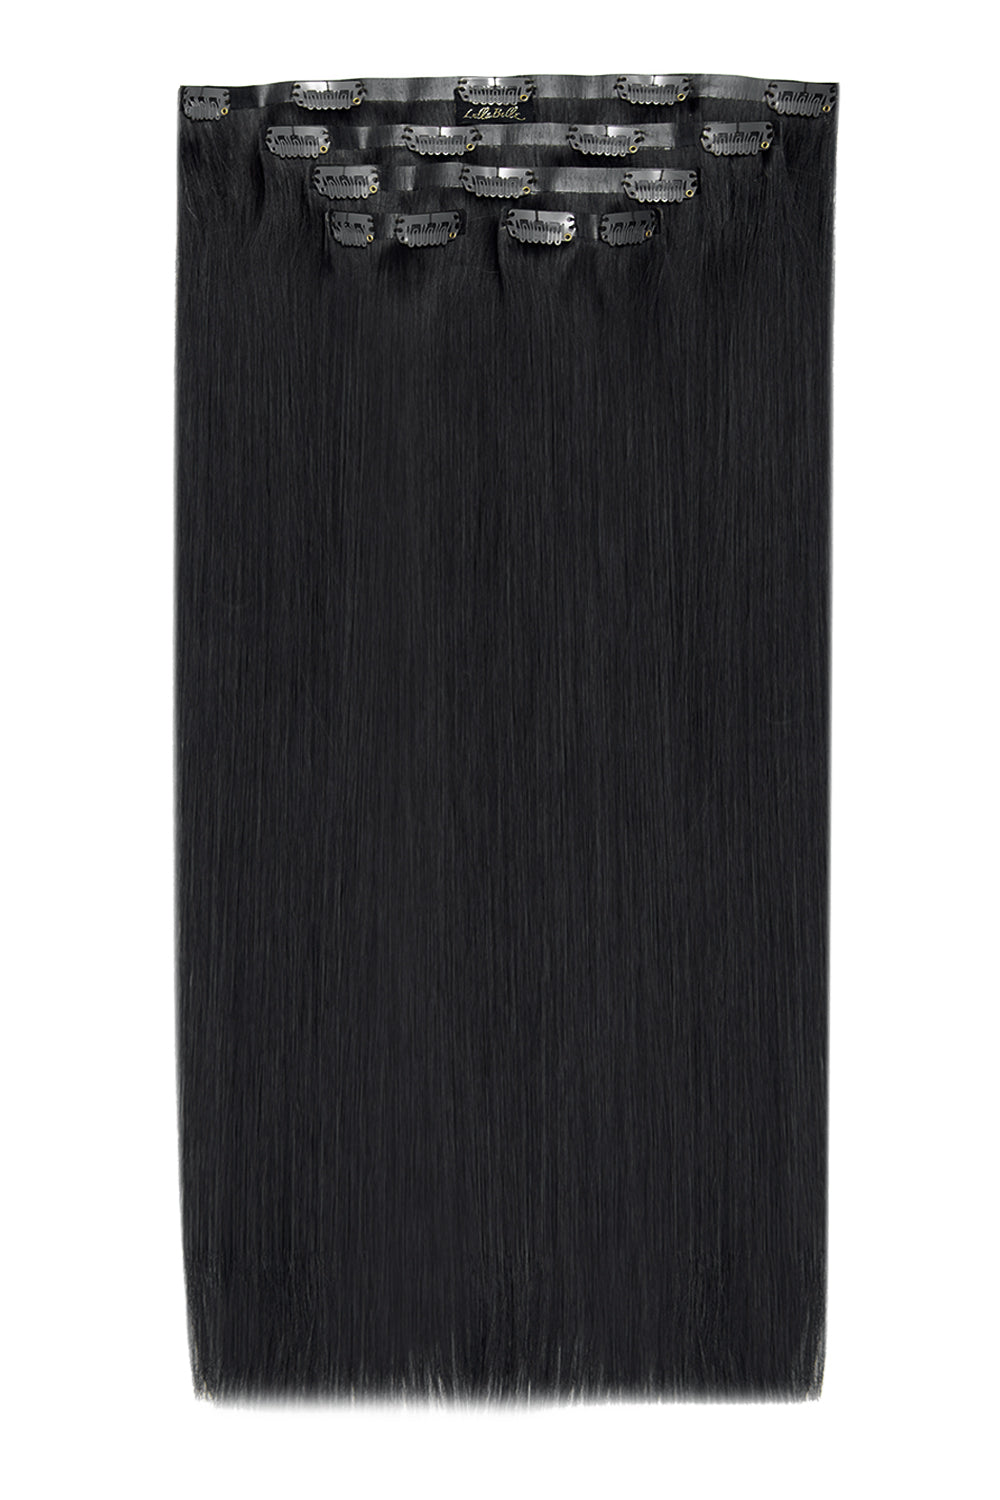 Luxury Gold 20" 5 Piece Human Hair Extensions  - Jet Black